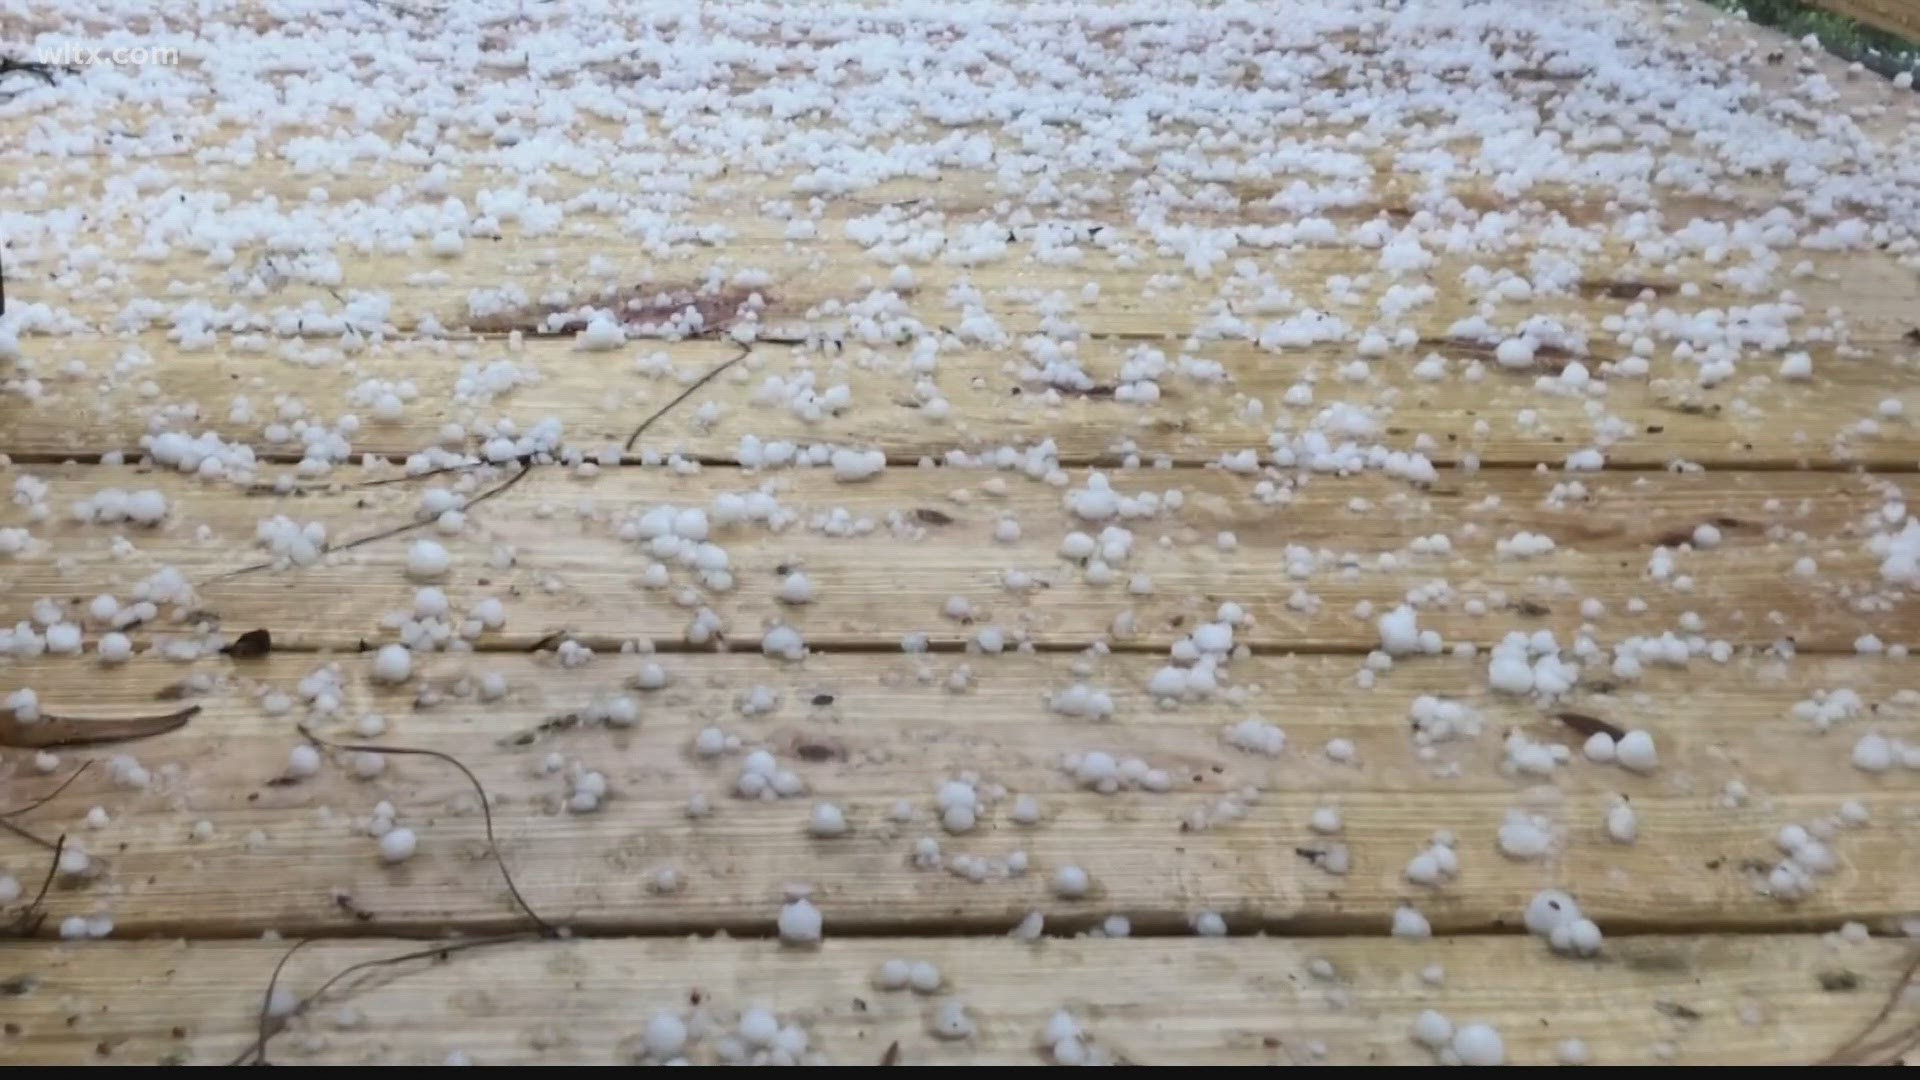 Views sent us video and photos of the pea and marble sized hail in the area.